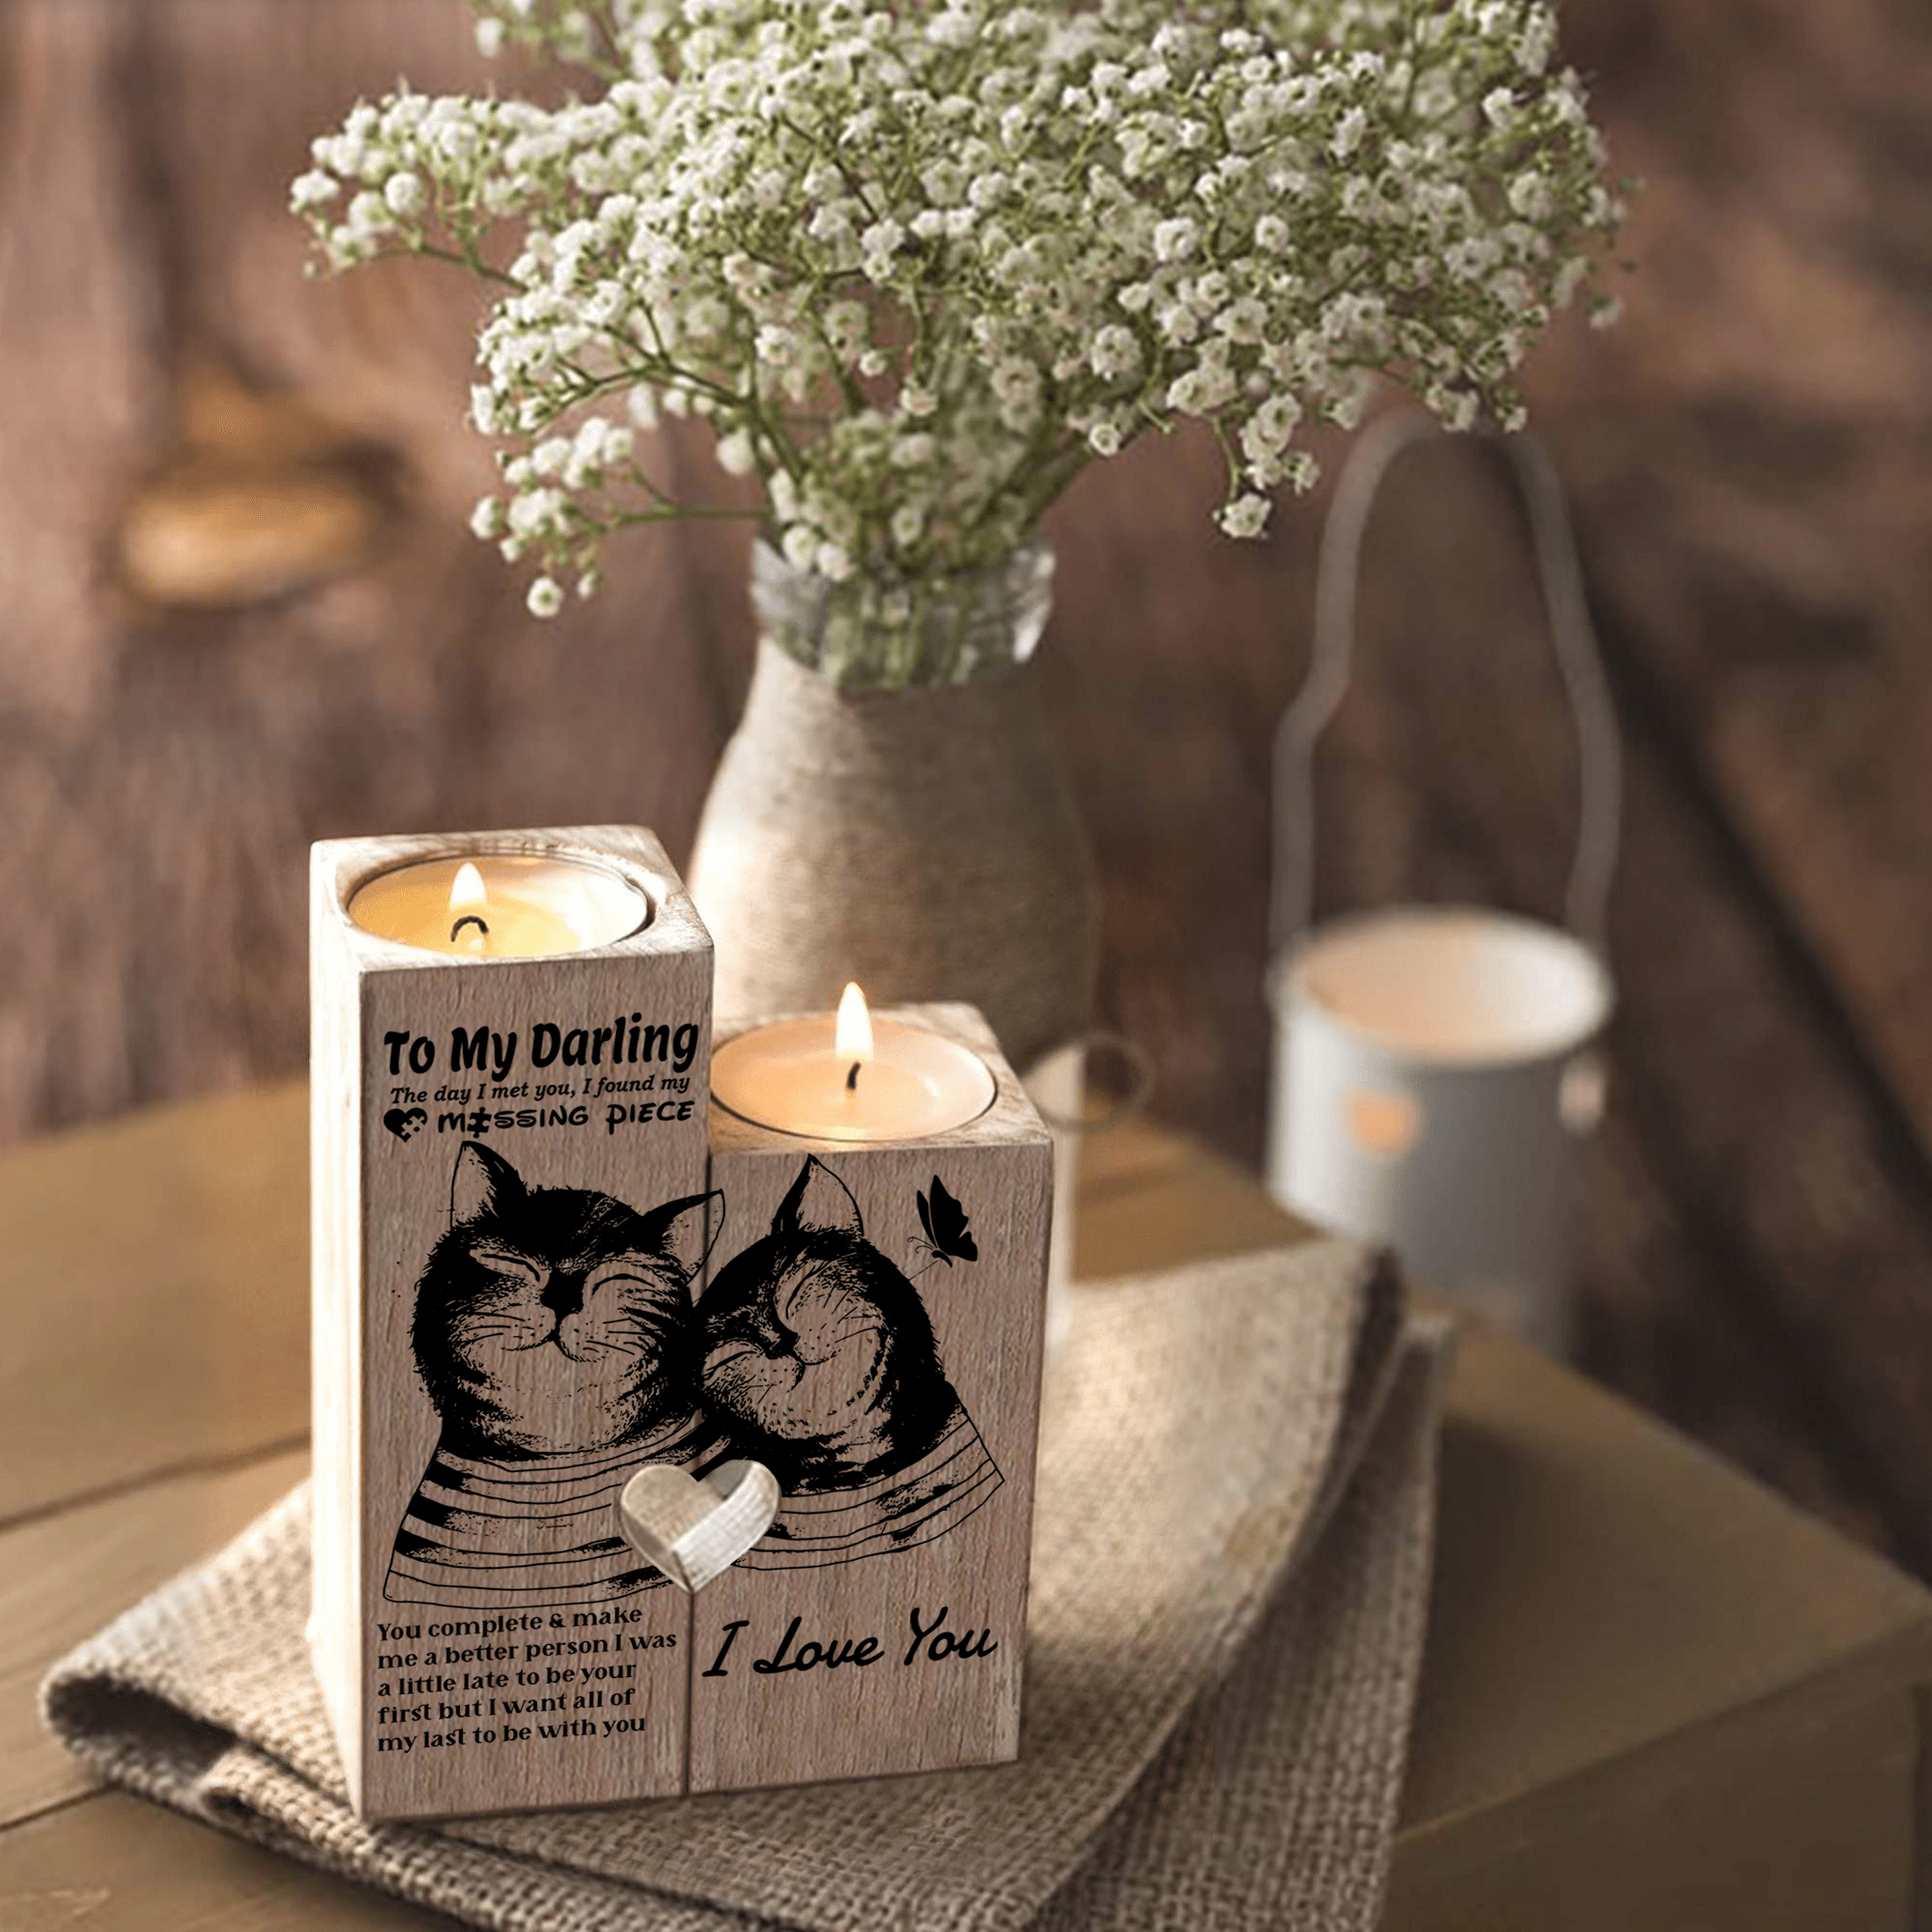 Candle Holders To My Darling - I Love You Wooden Candle Holders GiveMe-Gifts